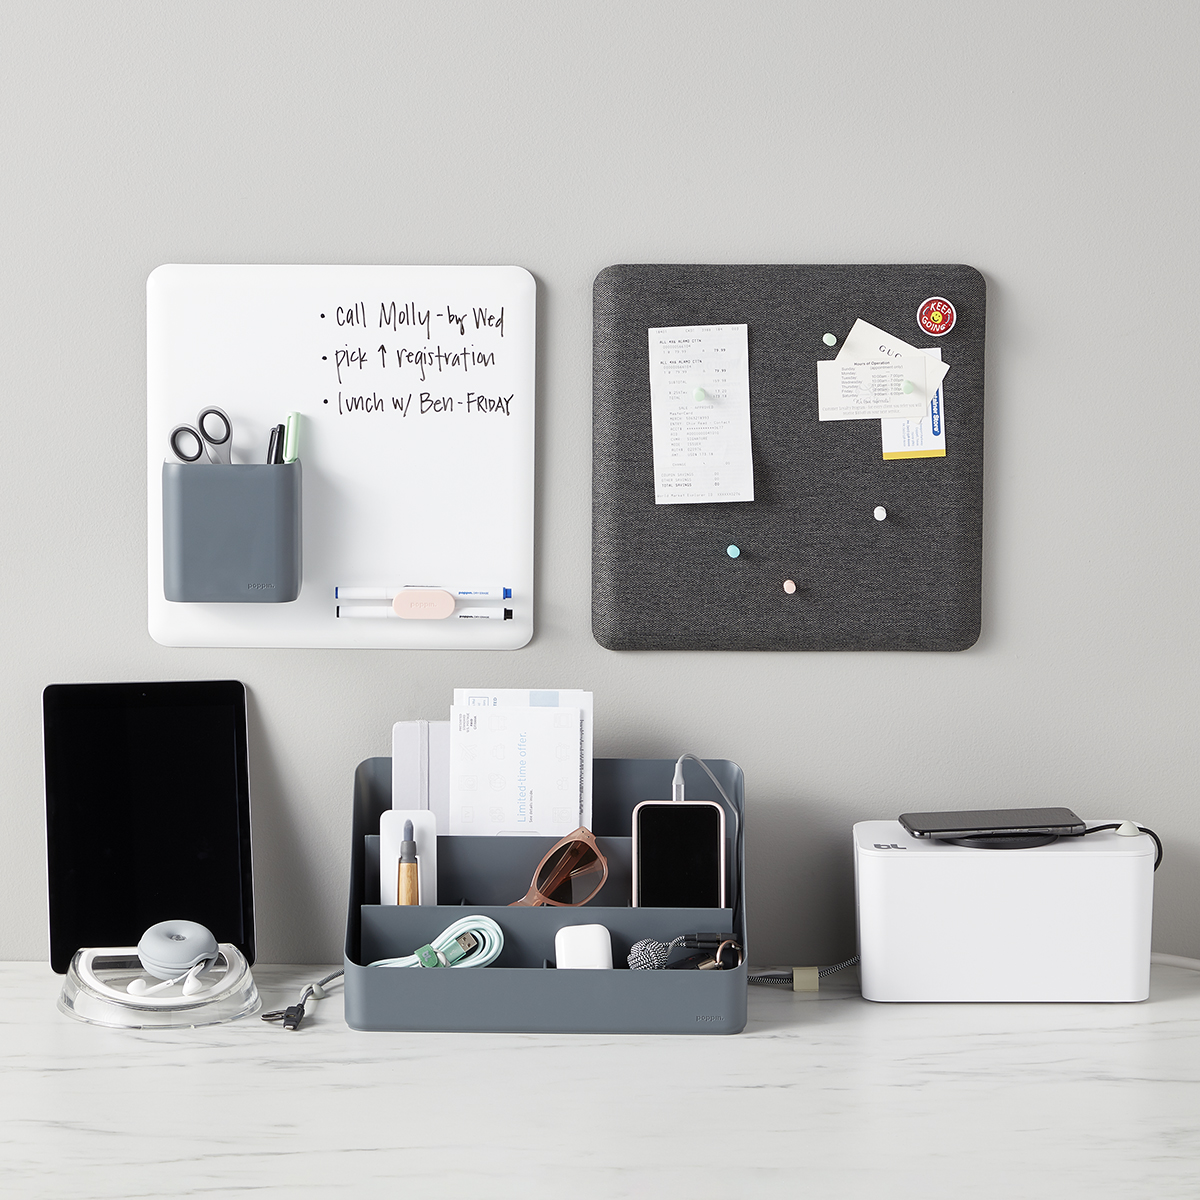 https://www.containerstore.com/catalogimages/370185/OF_19_Office_Organizer_RGB.jpg